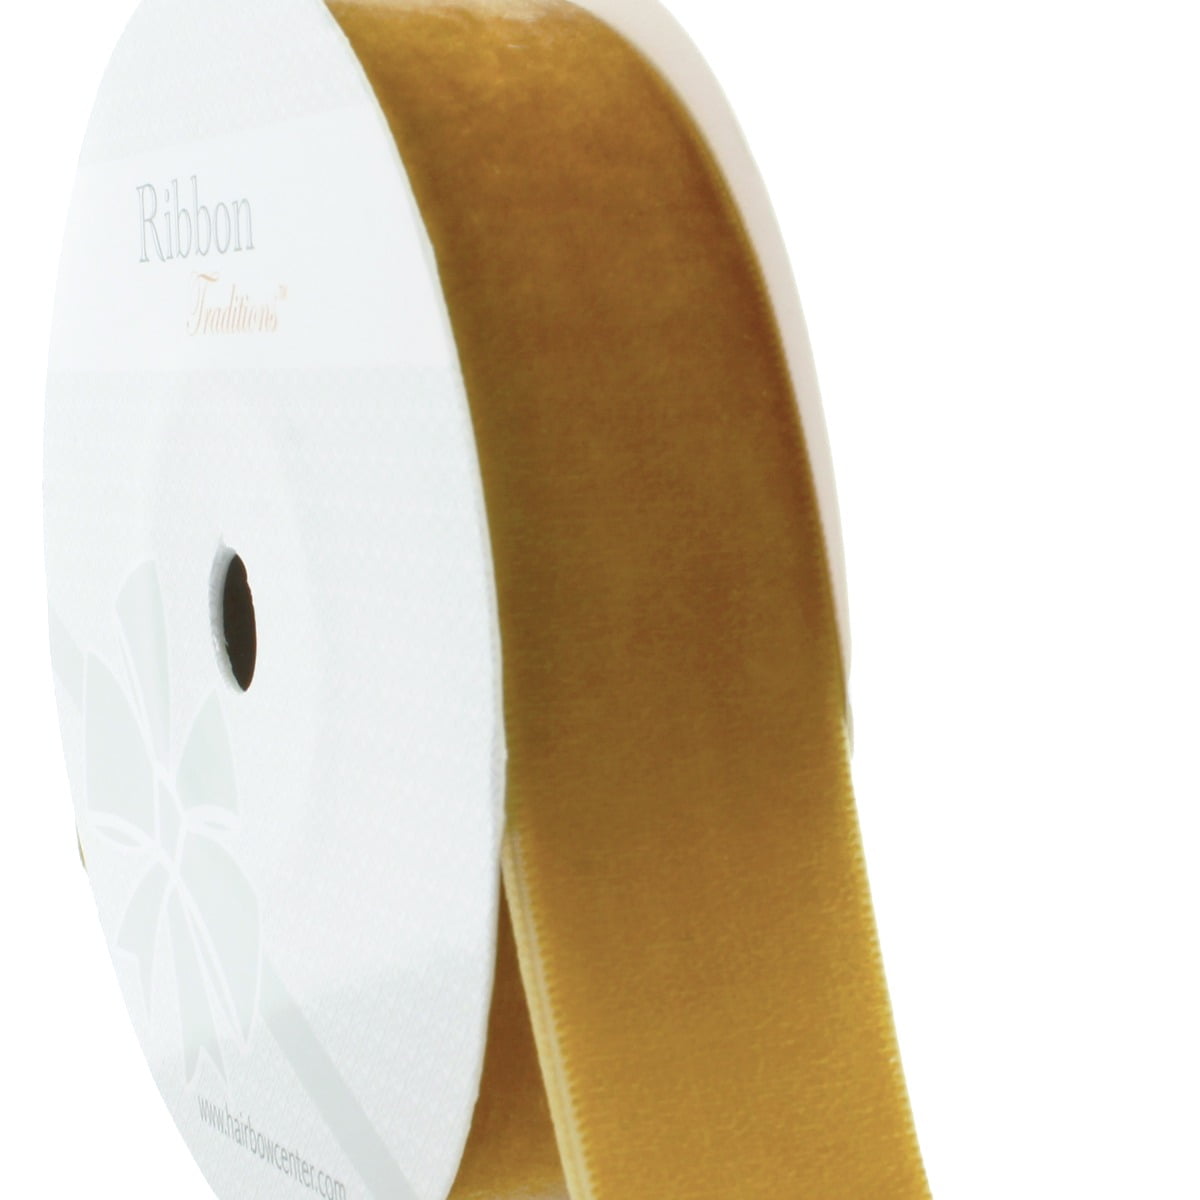 Antique Gold Satin Ribbon with Gold Edges, 3/8 x 50yd